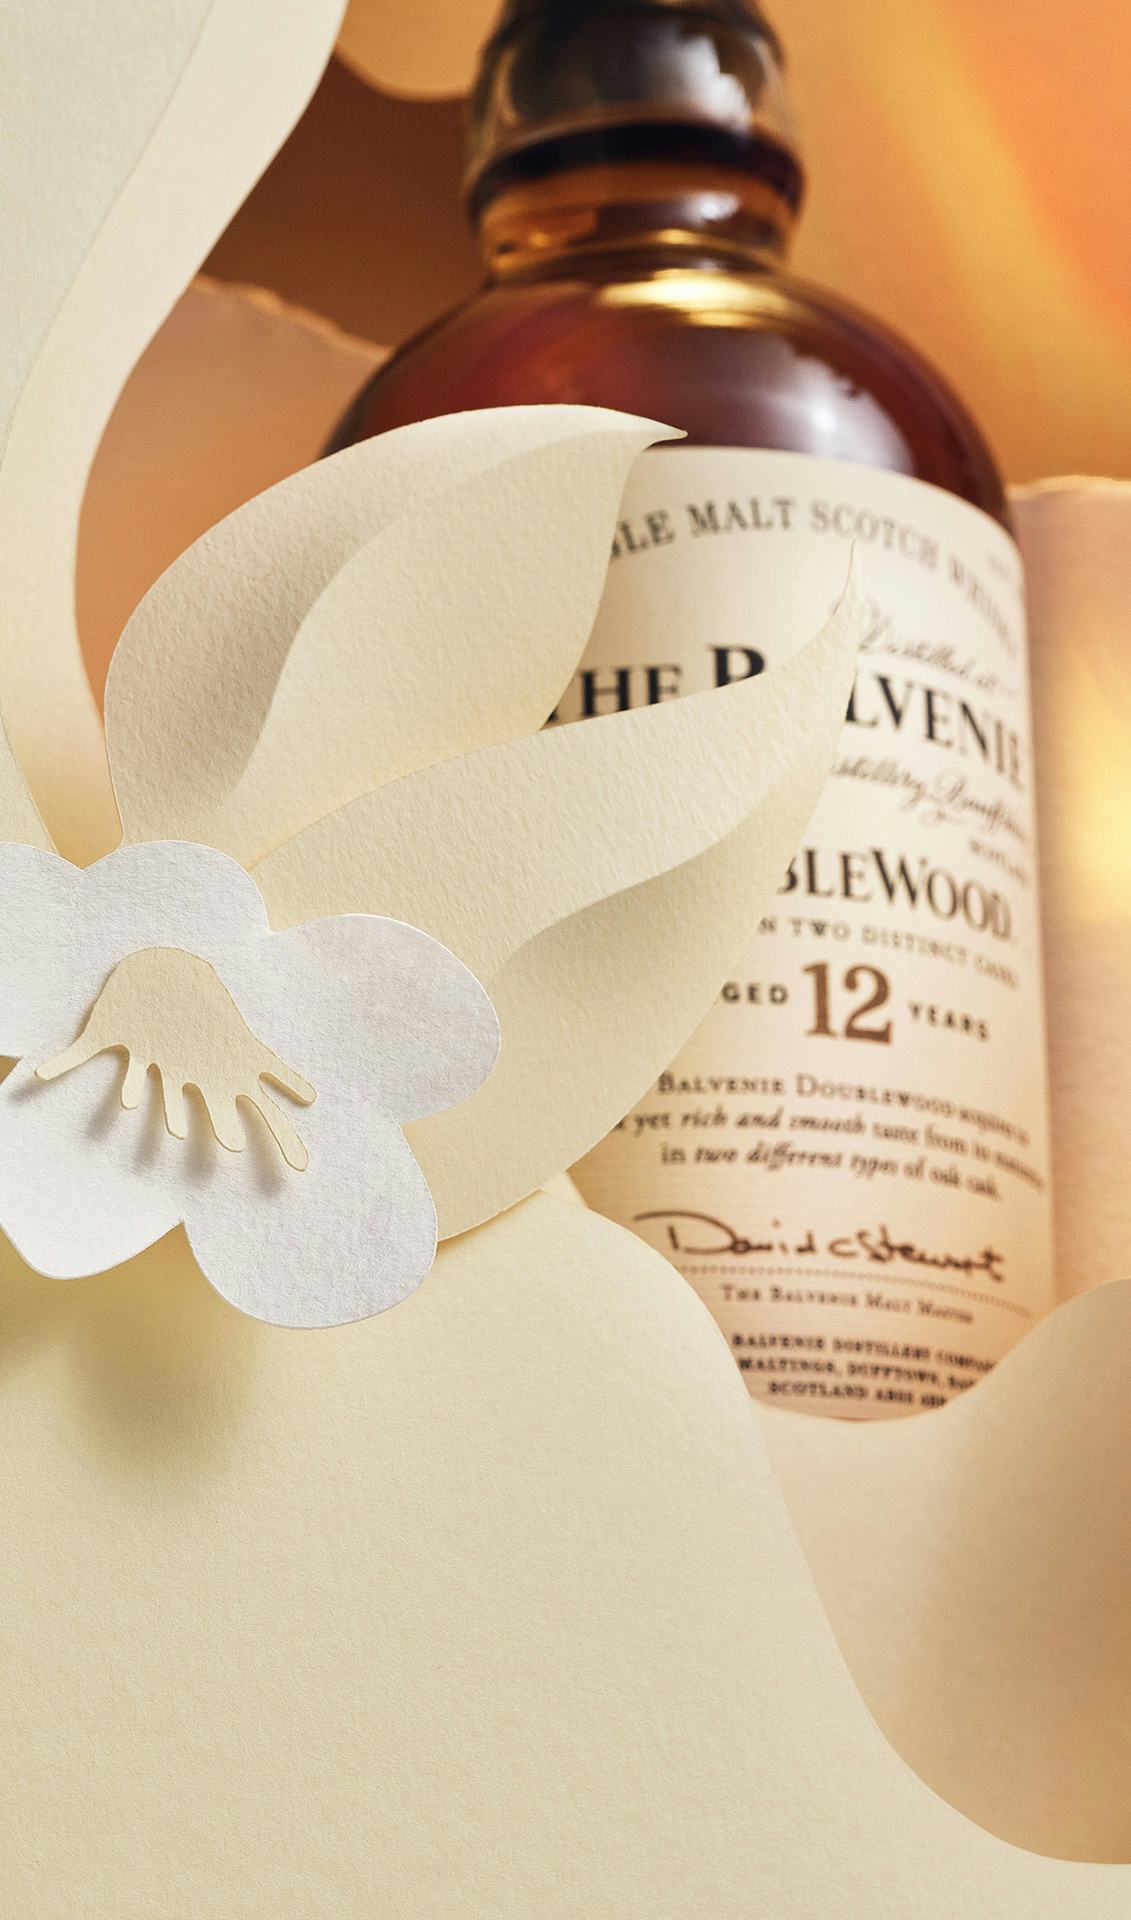 The Balvenie DoubleWood12 in a paper display with golden light and a paper flower